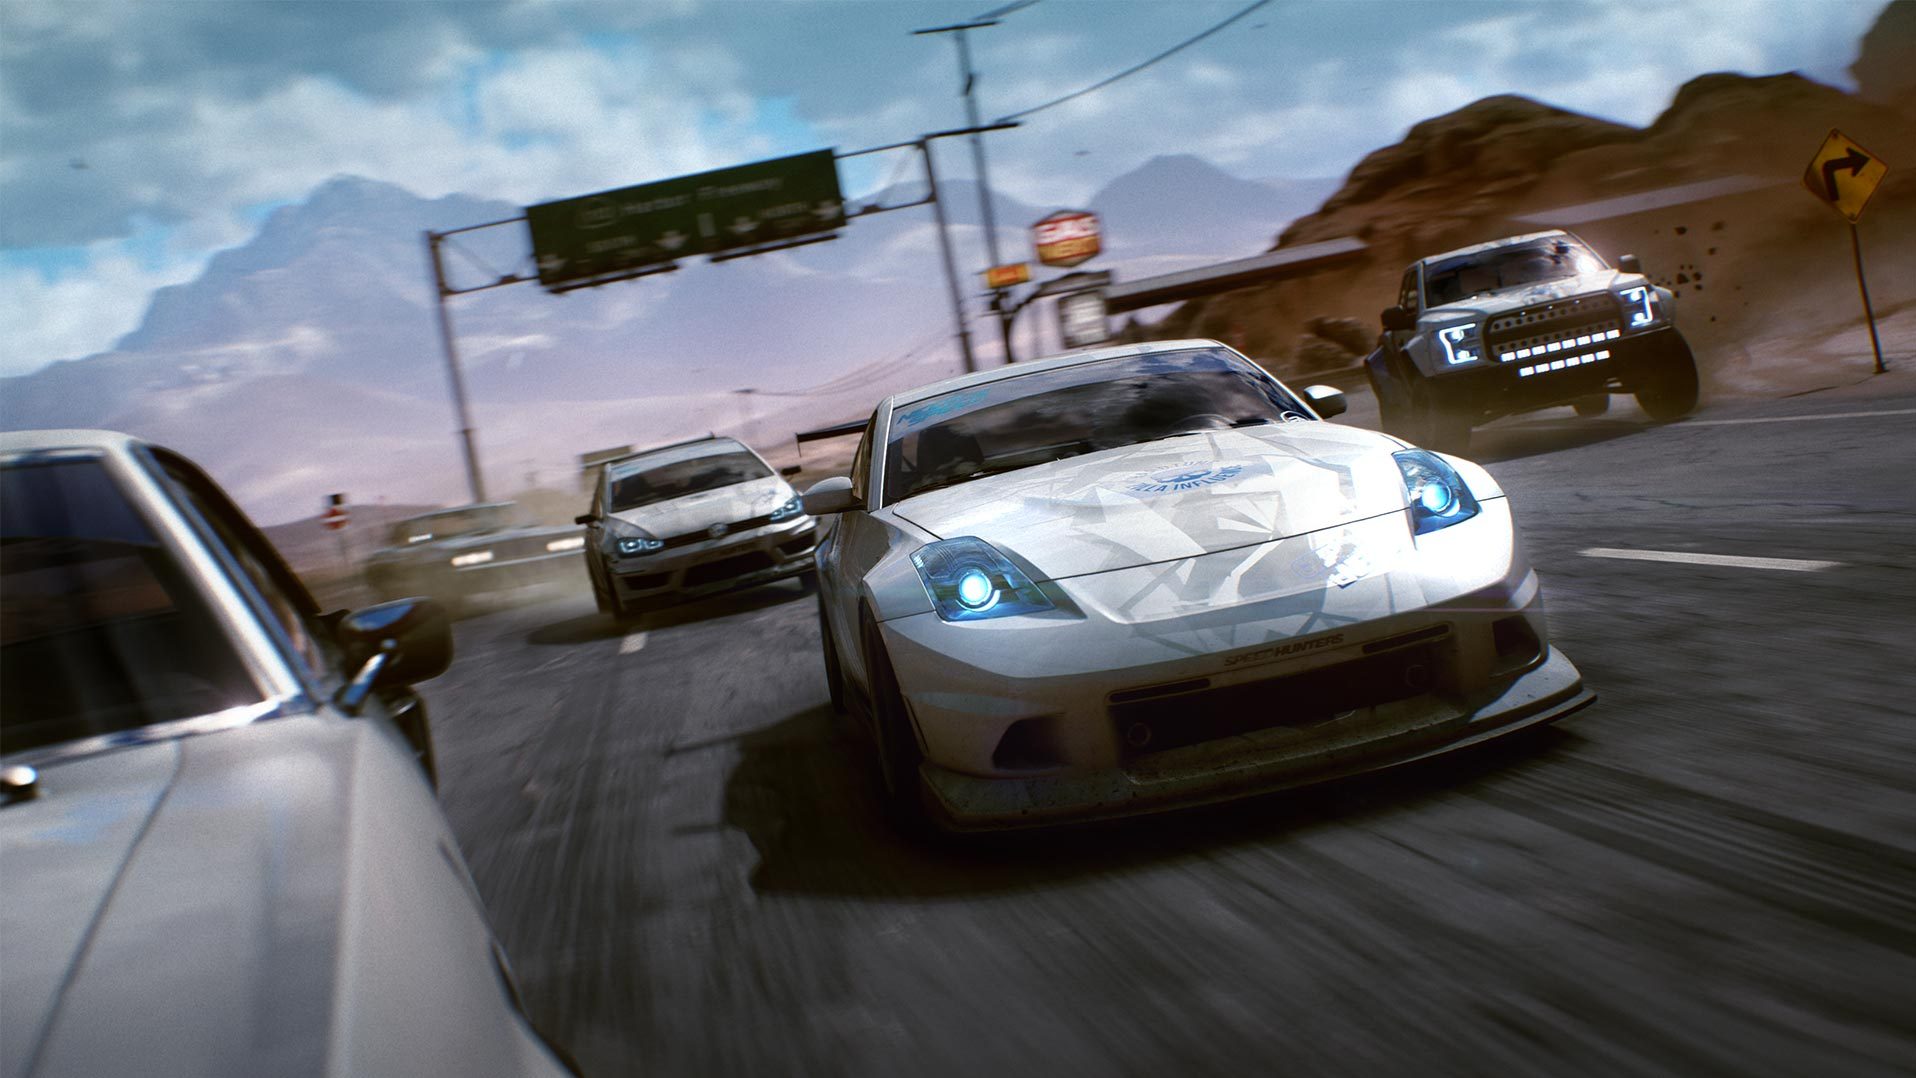 Need for Speed Payback system requirements